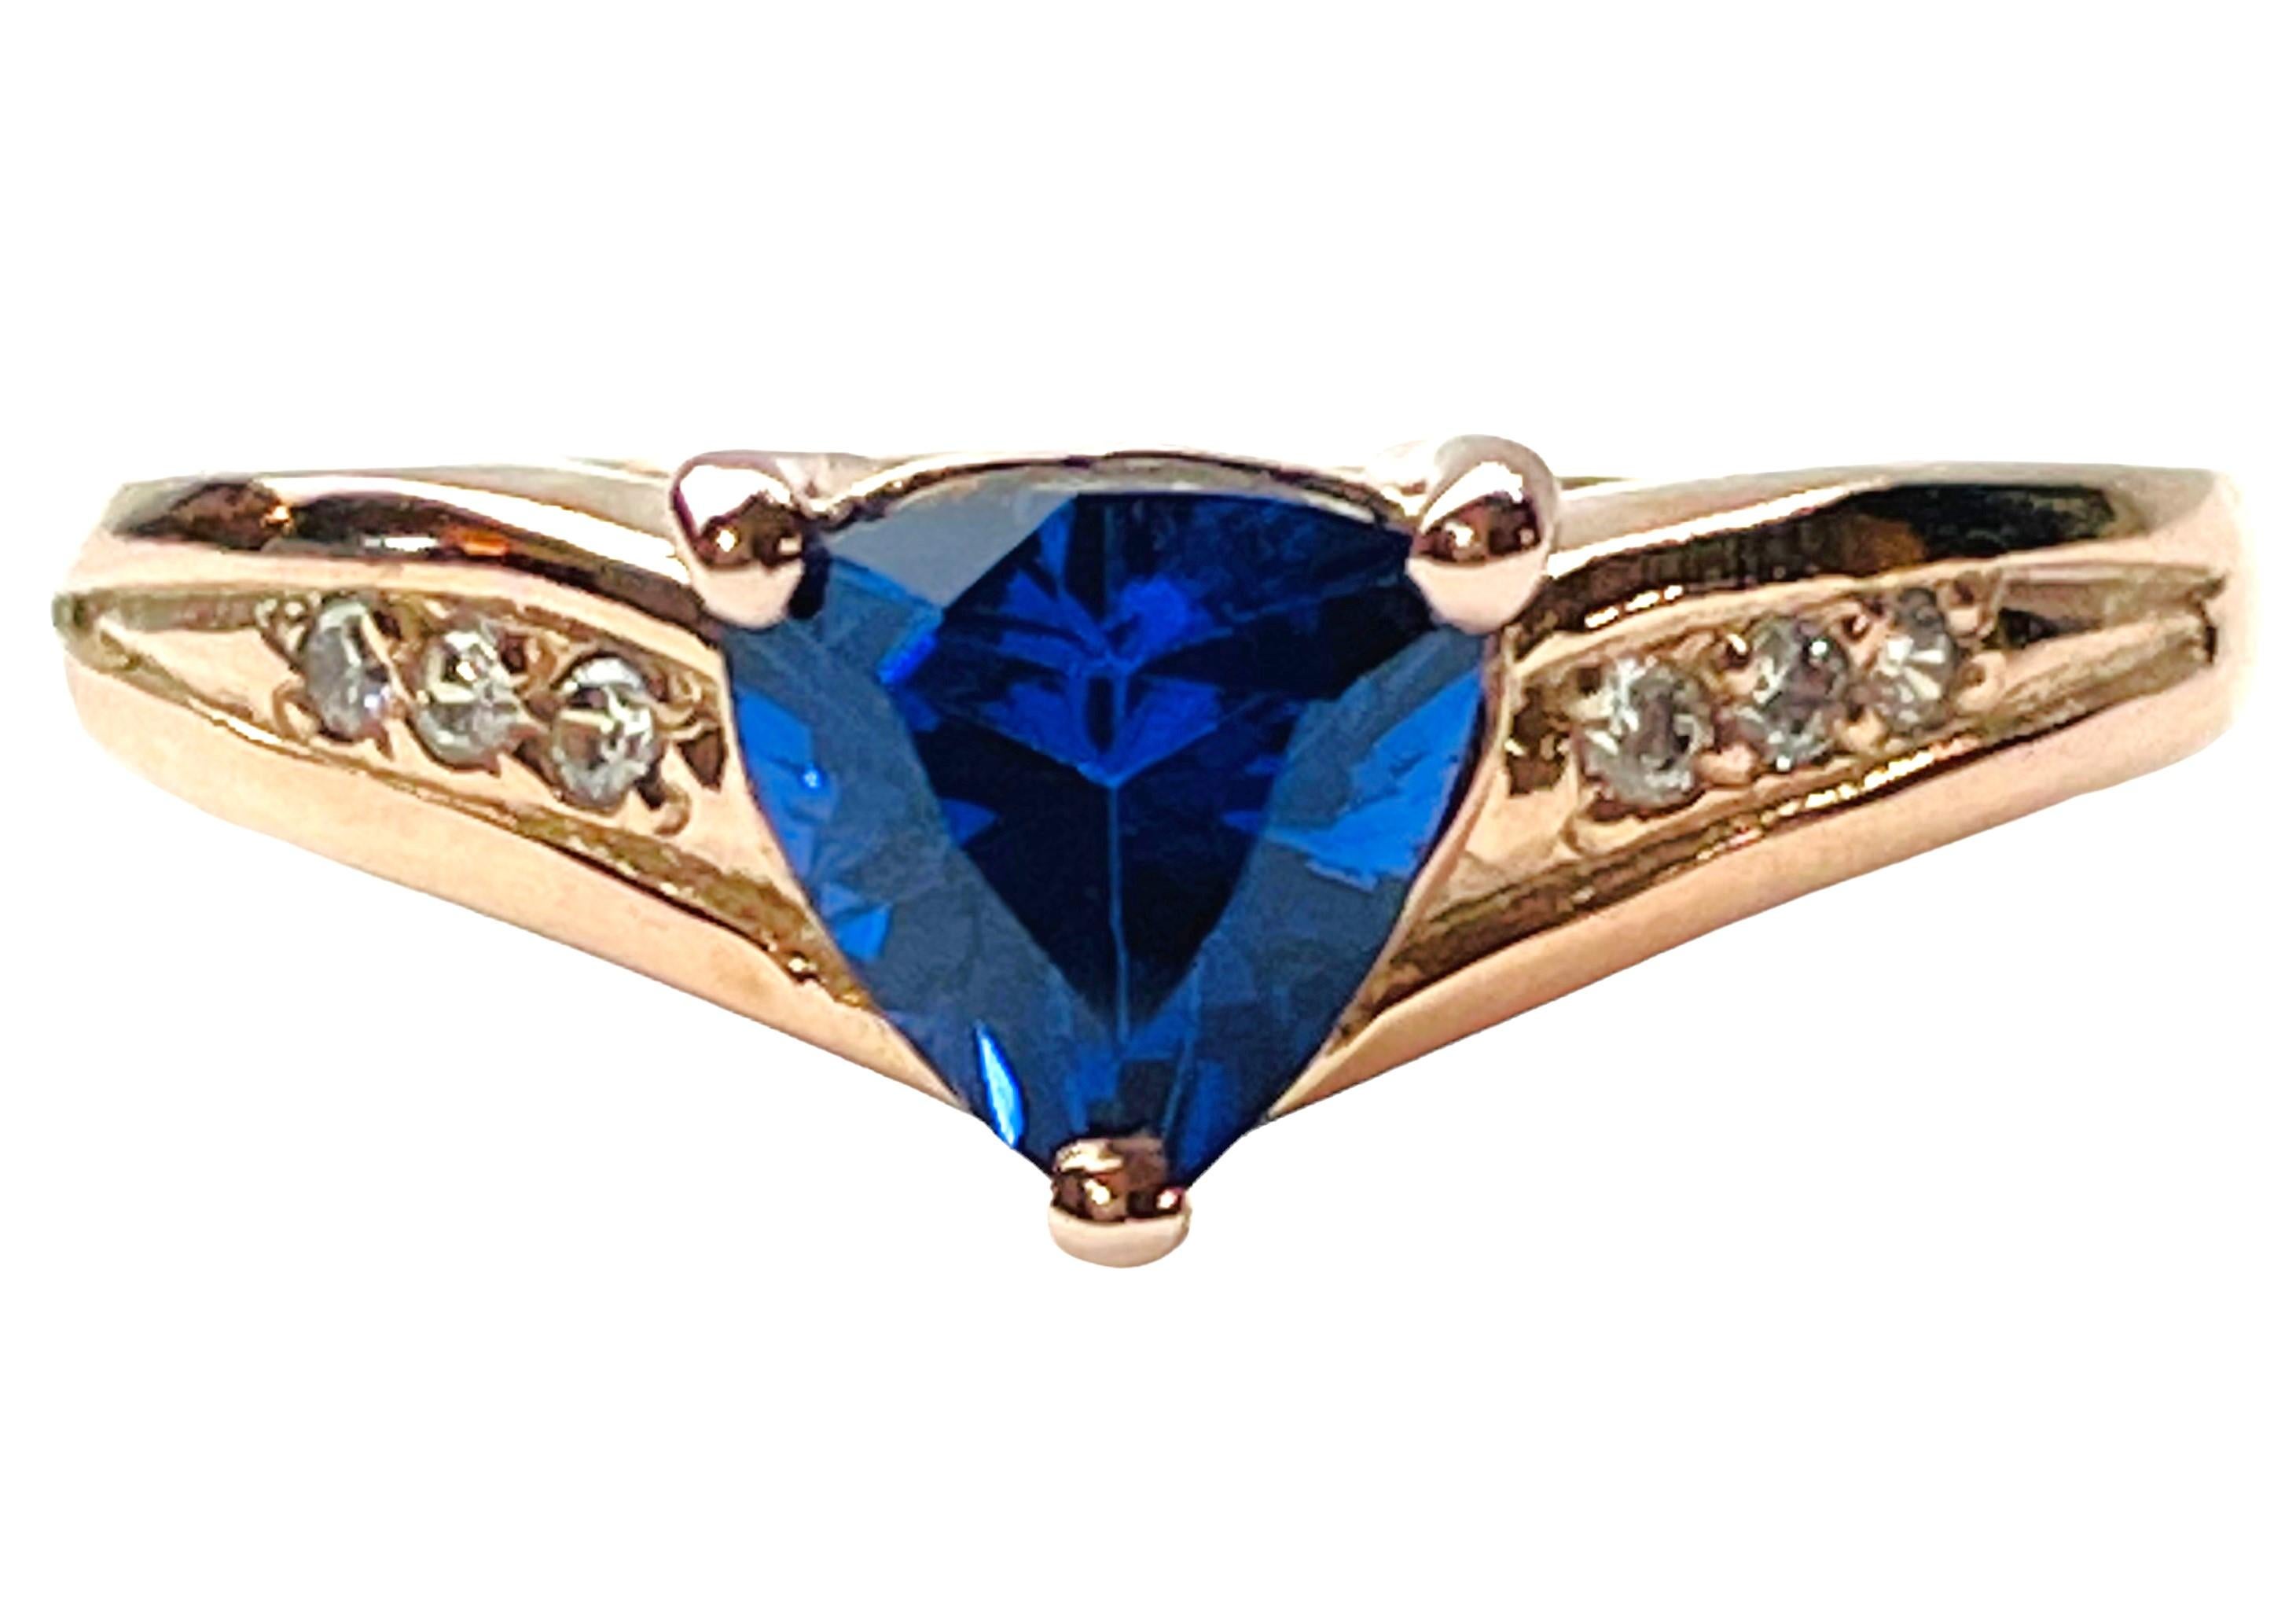 What a gorgeous ring this is.  It is a size 6.75.  The sapphire is from Africa and I love that it's a trillion cut.  It's a very high quality stone.  The 